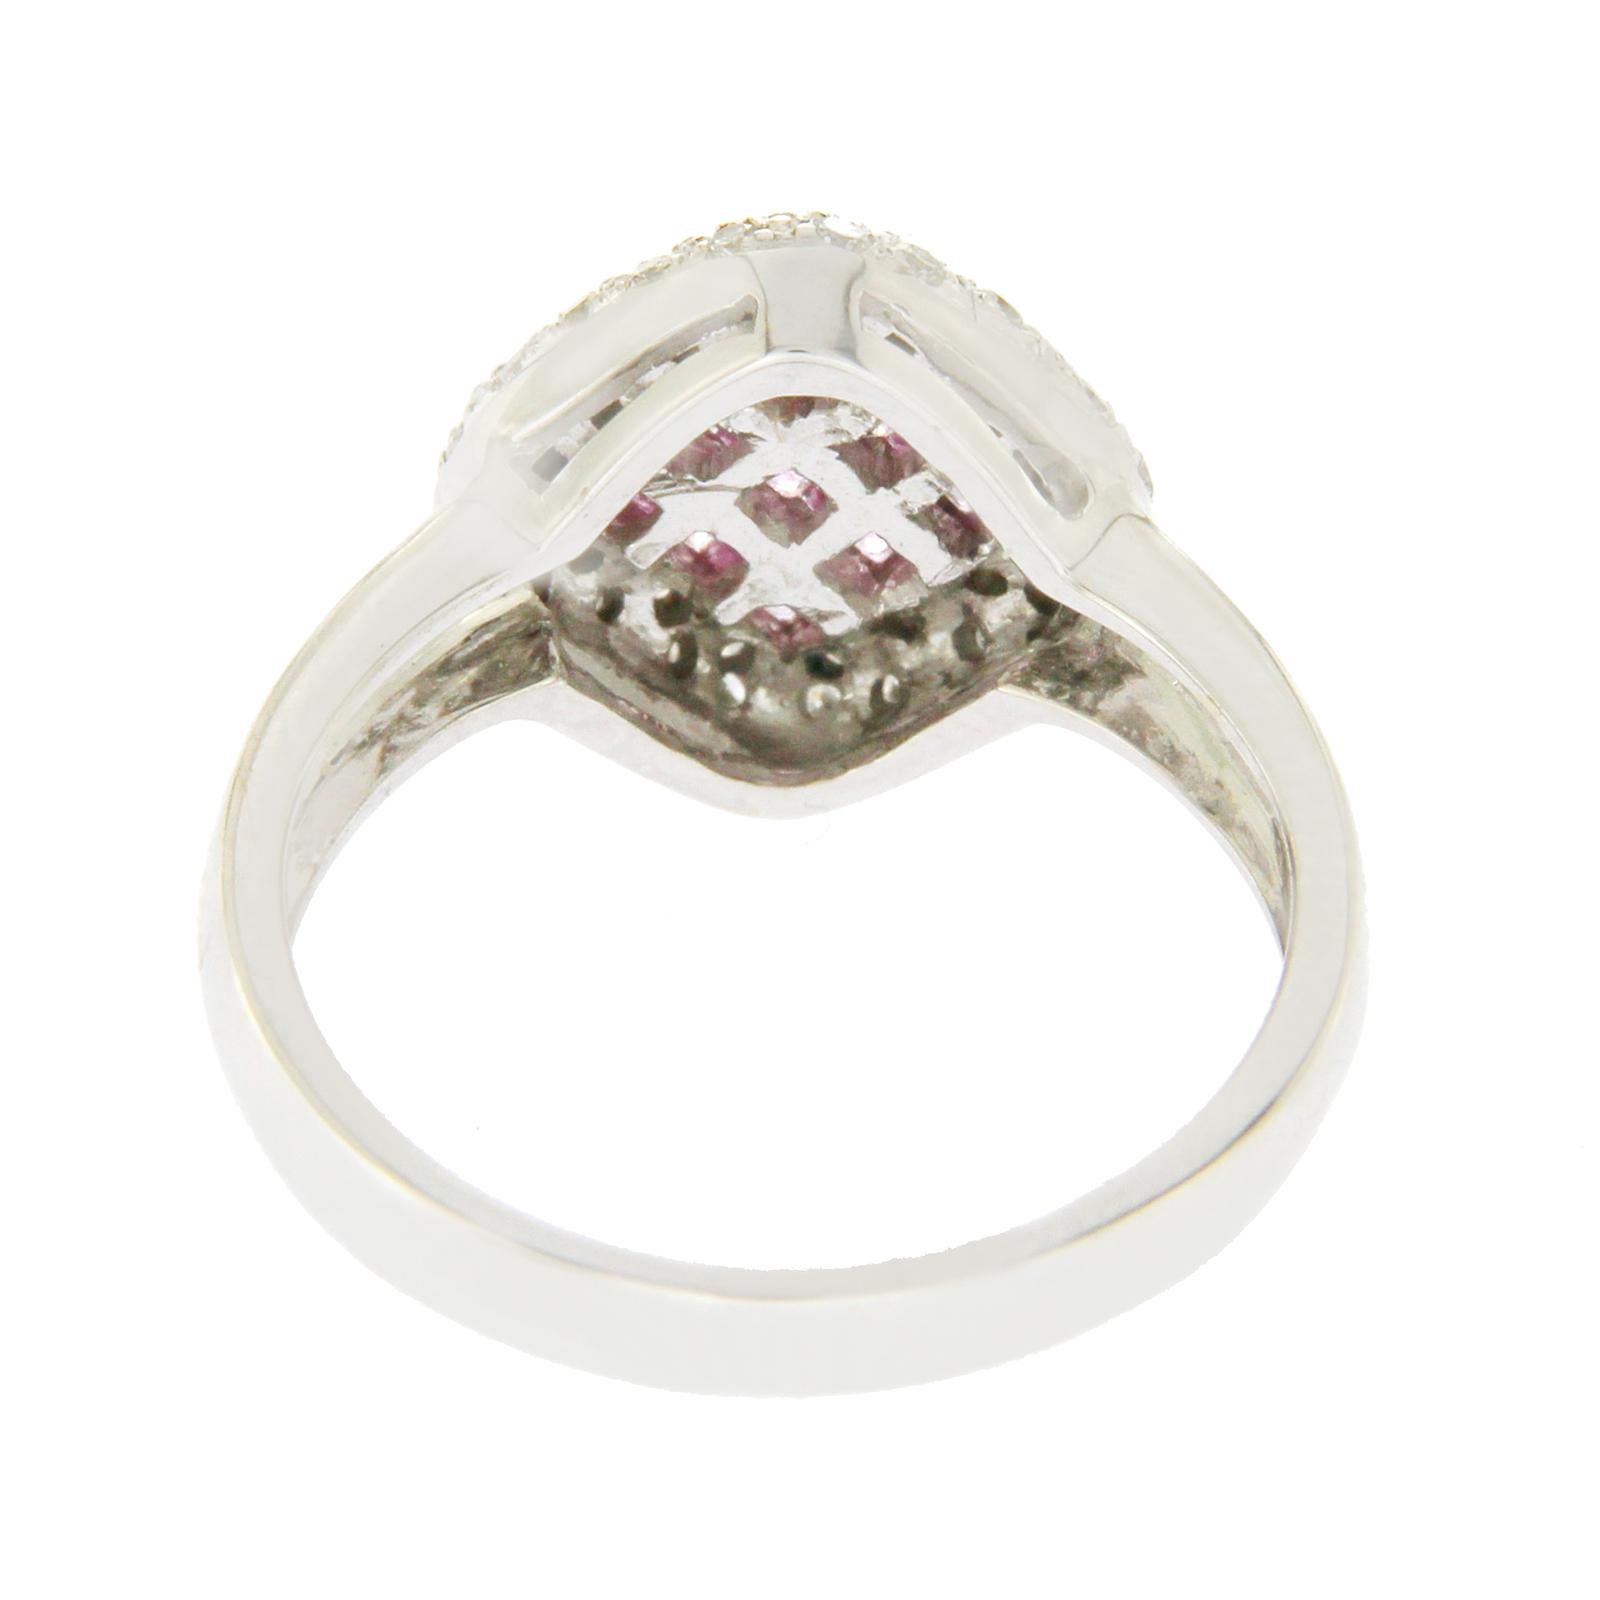 1.27 Carat Pink Sapphire and 0.24 Carat Diamonds in 18 Karat White Gold Ring In New Condition For Sale In Los Angeles, CA